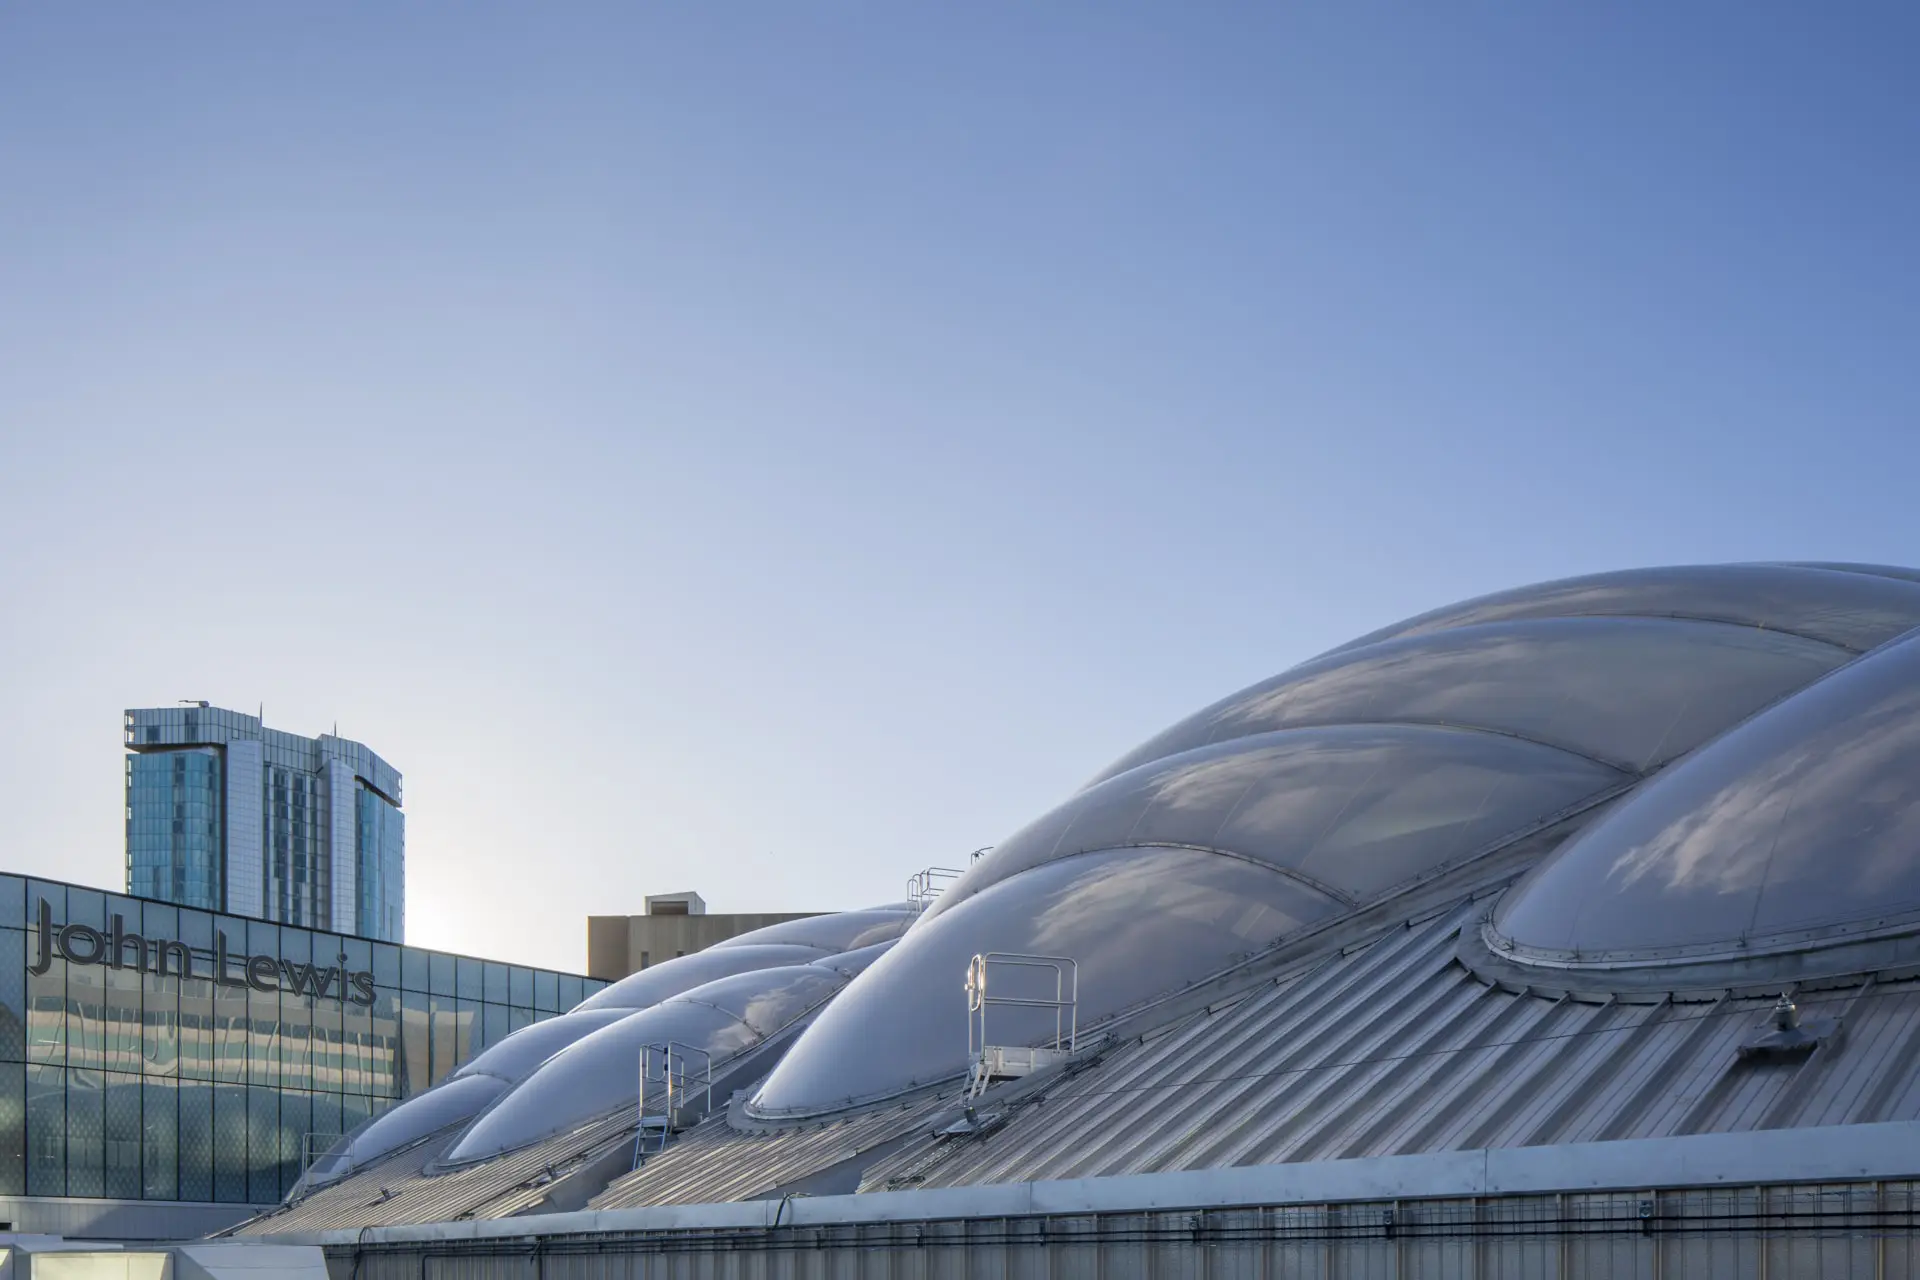 View from outside onto the ETFE atrium.